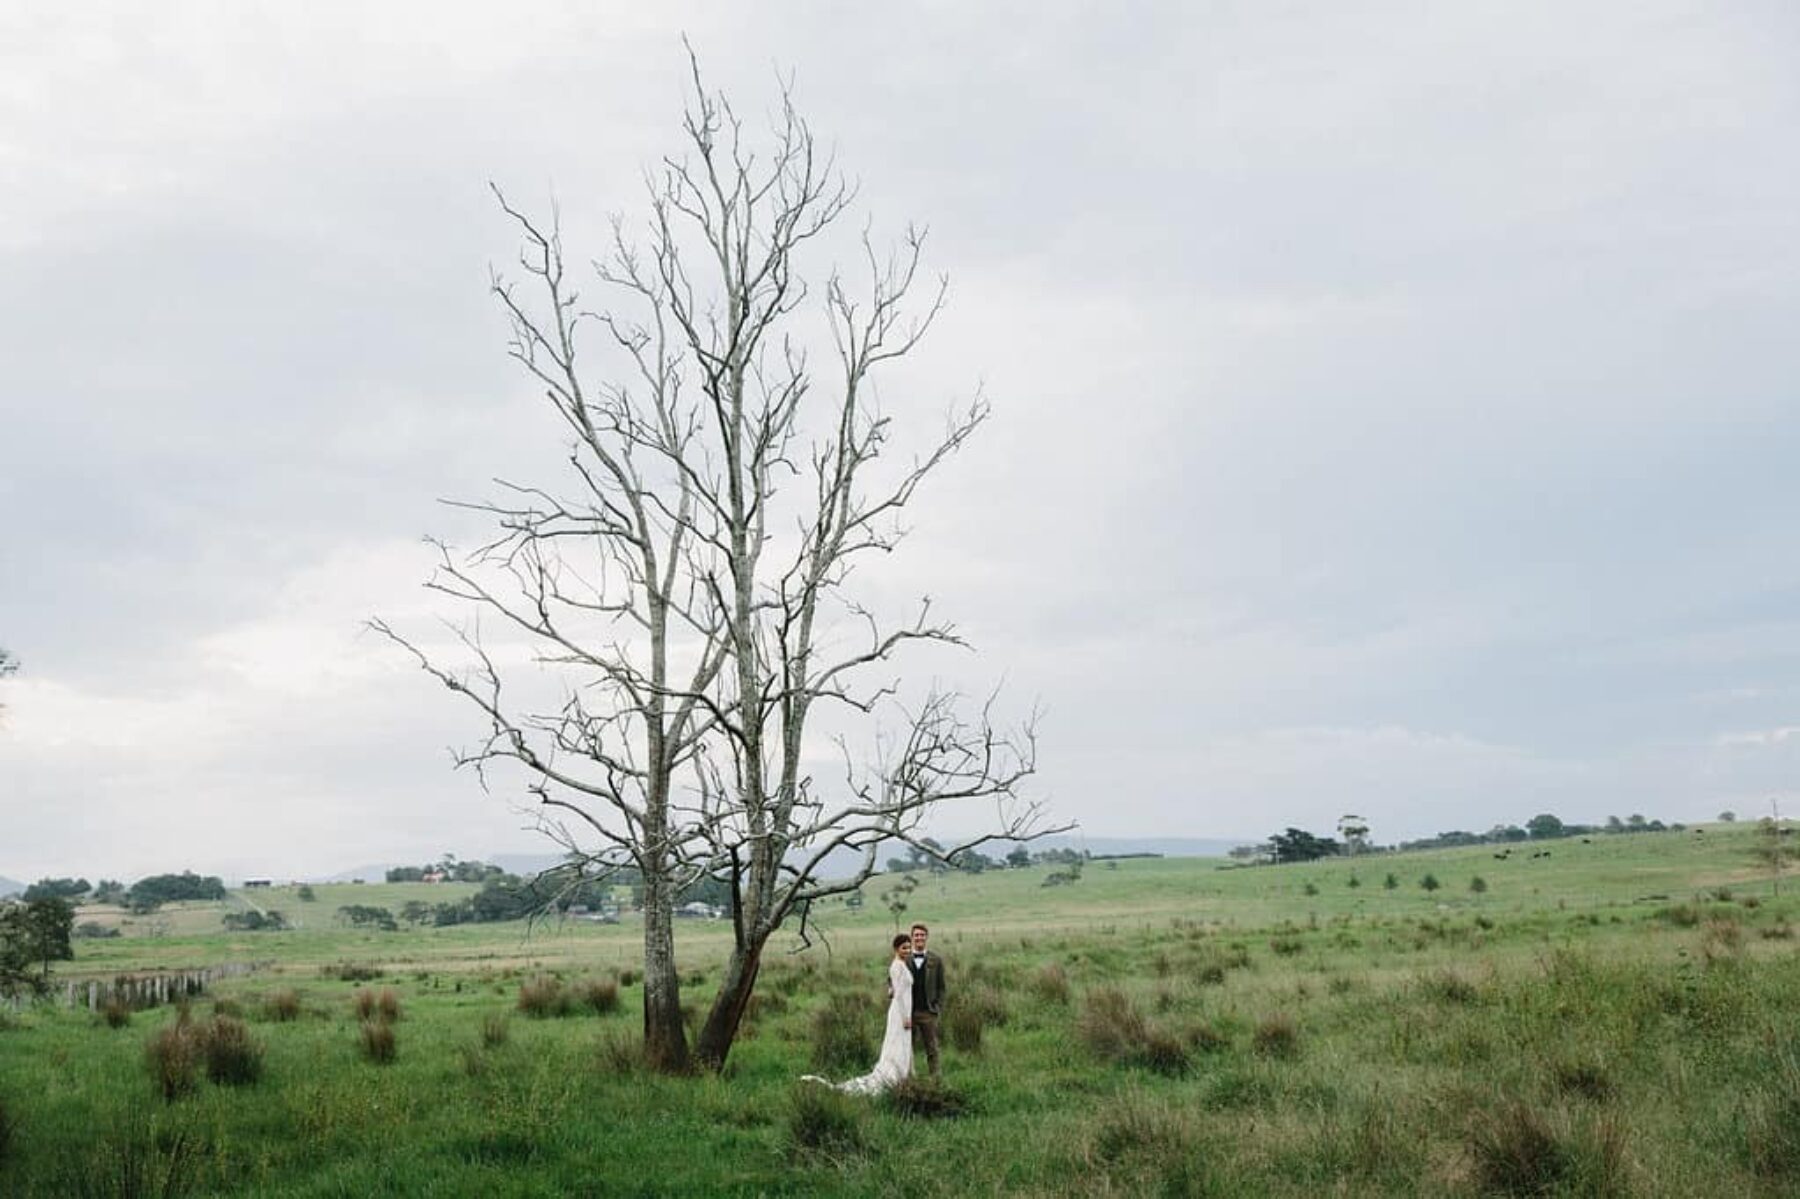 Autumn weddng at Cupitt's Winery Ulladulla / Photography by Jimmy Raper